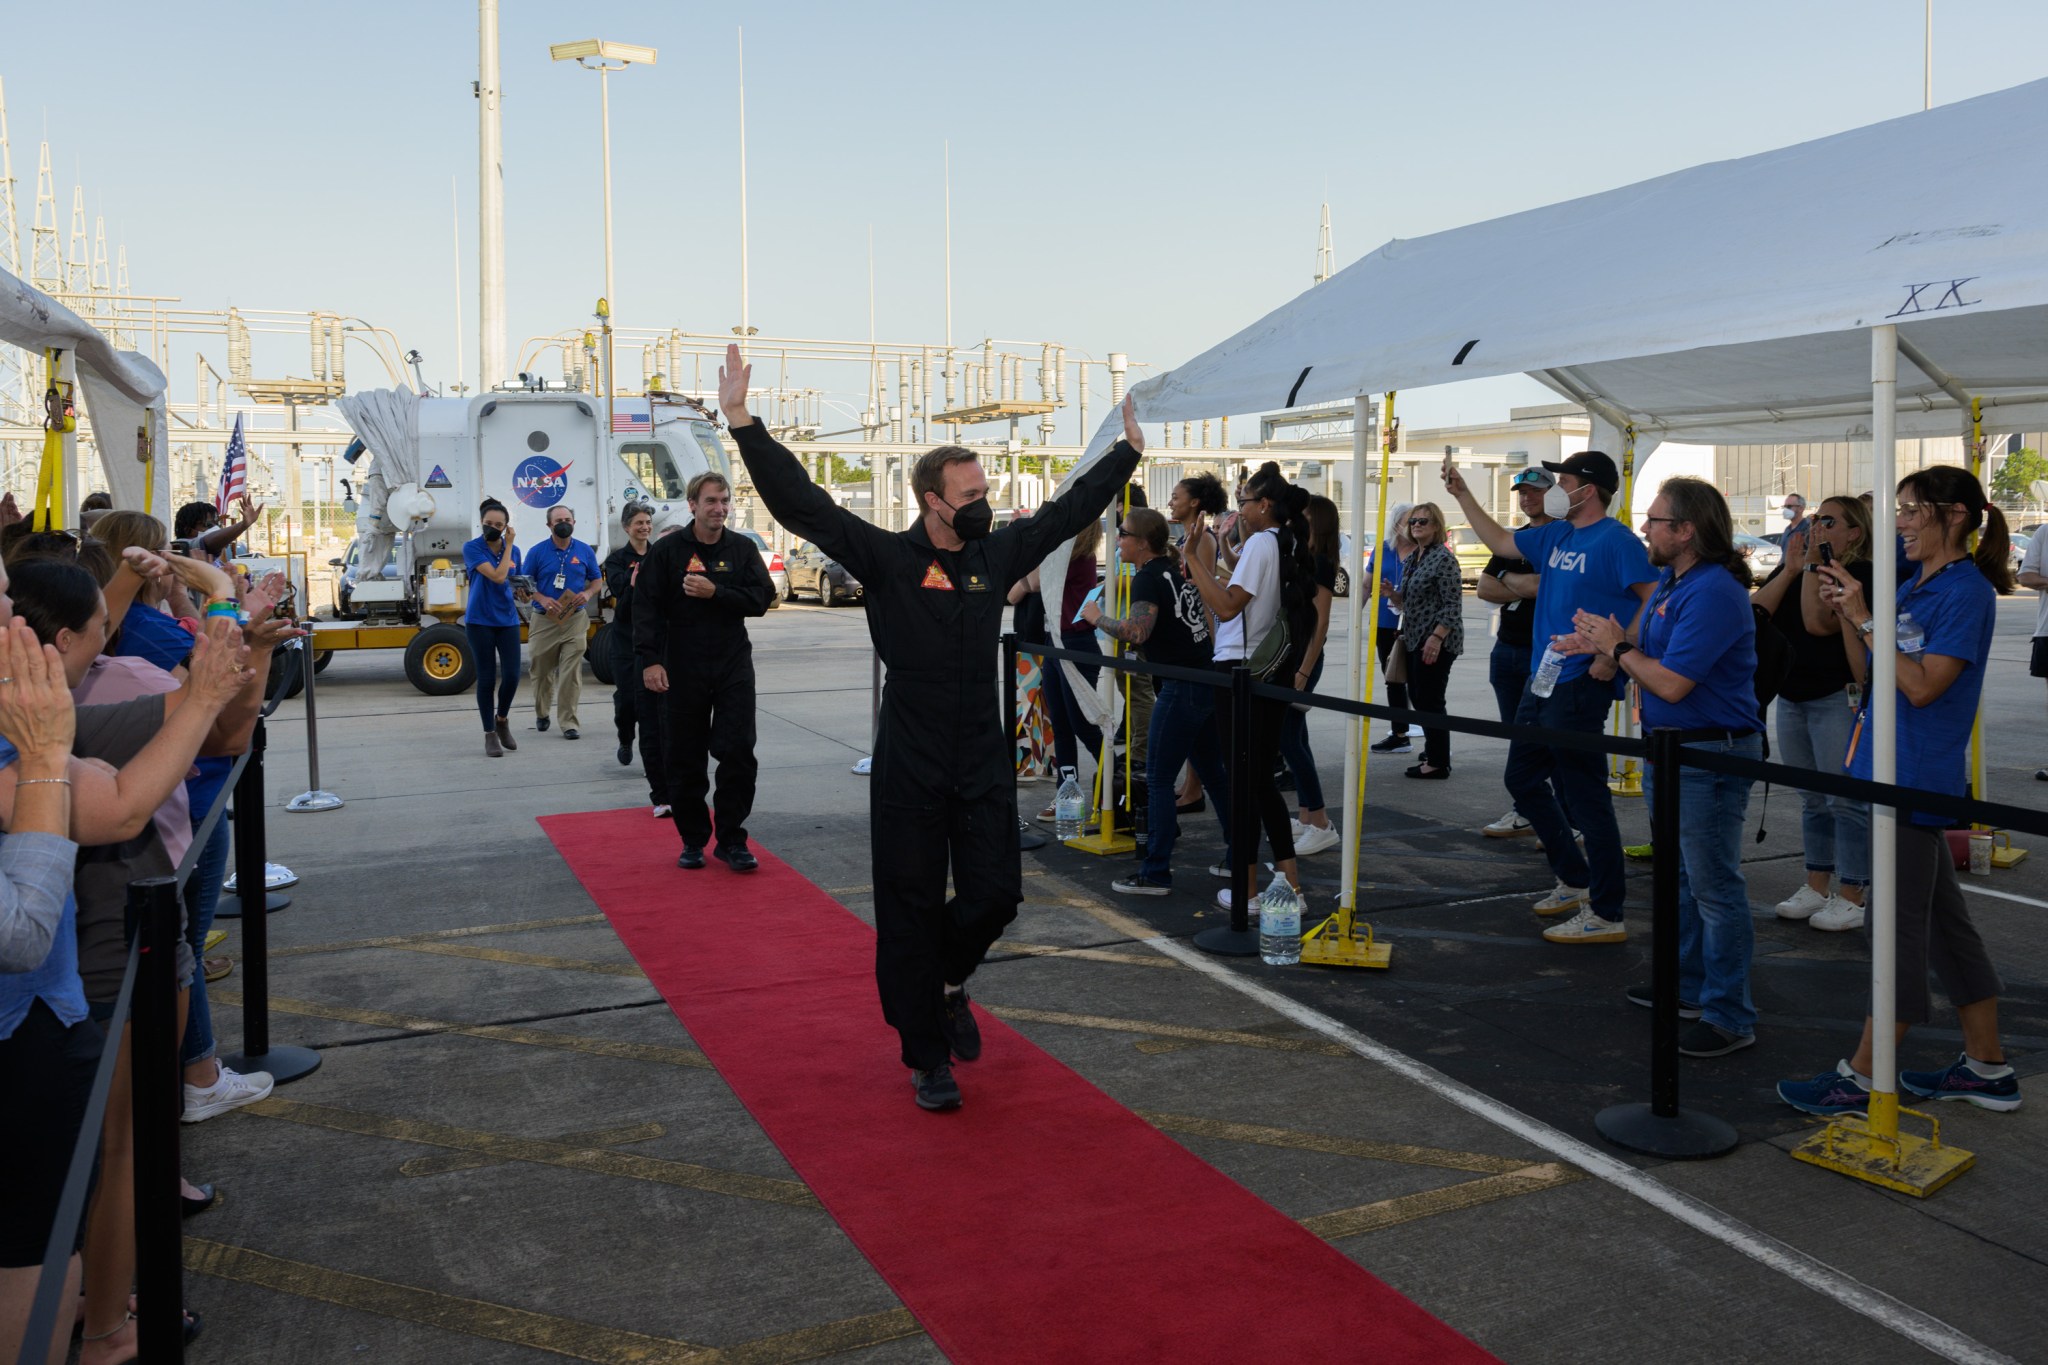 Nathan Jones, CHAPEA mission 1 medical officer, waves to members of the project team and leadership from NASA’s Johnson Space Center upon arriving at the facility.